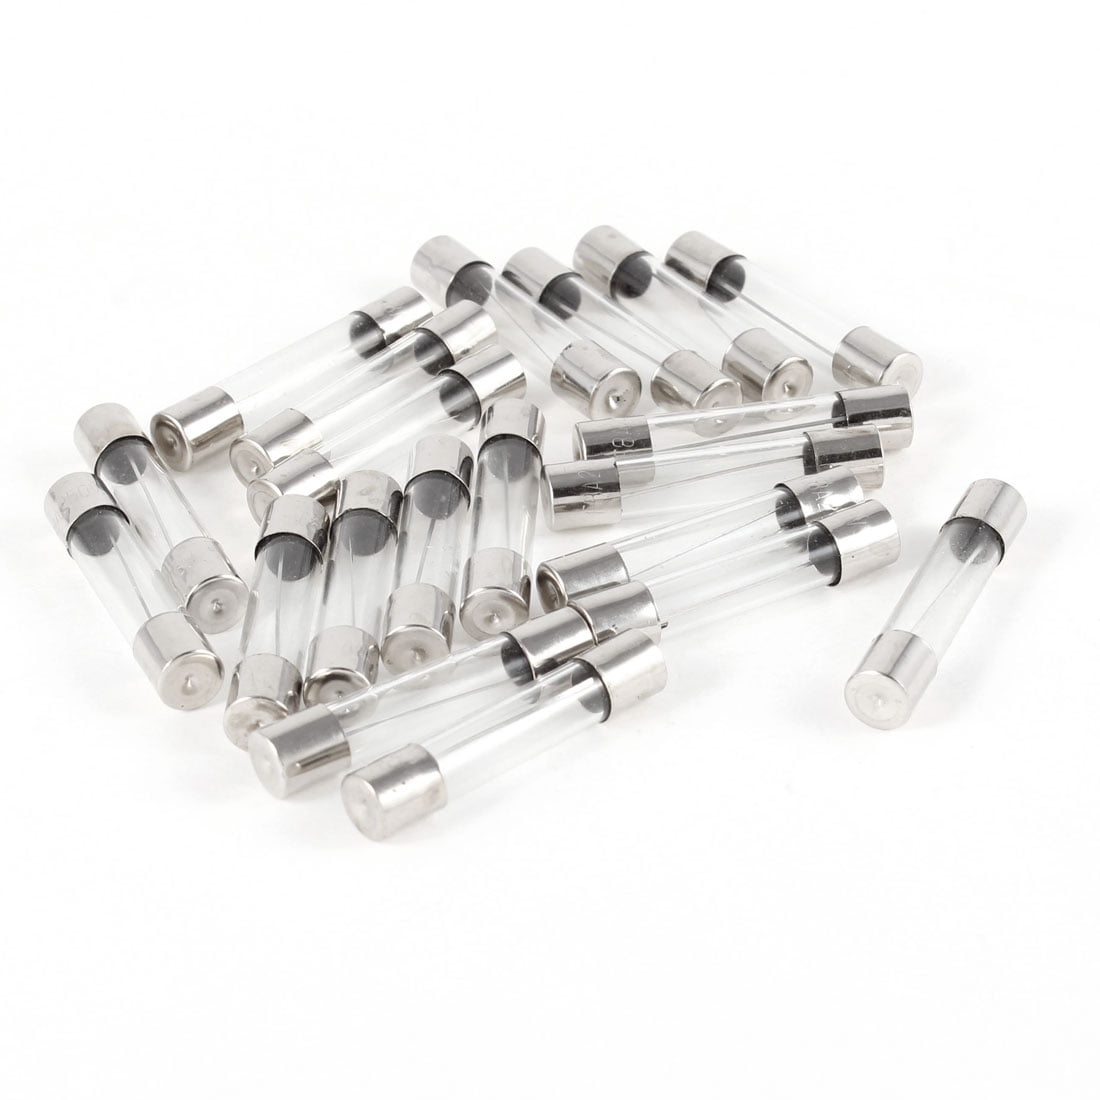 Details about   100 Pcs Glass Fuse 1A 250V 6mm x 30mm Fast Blow 6x30mm New 